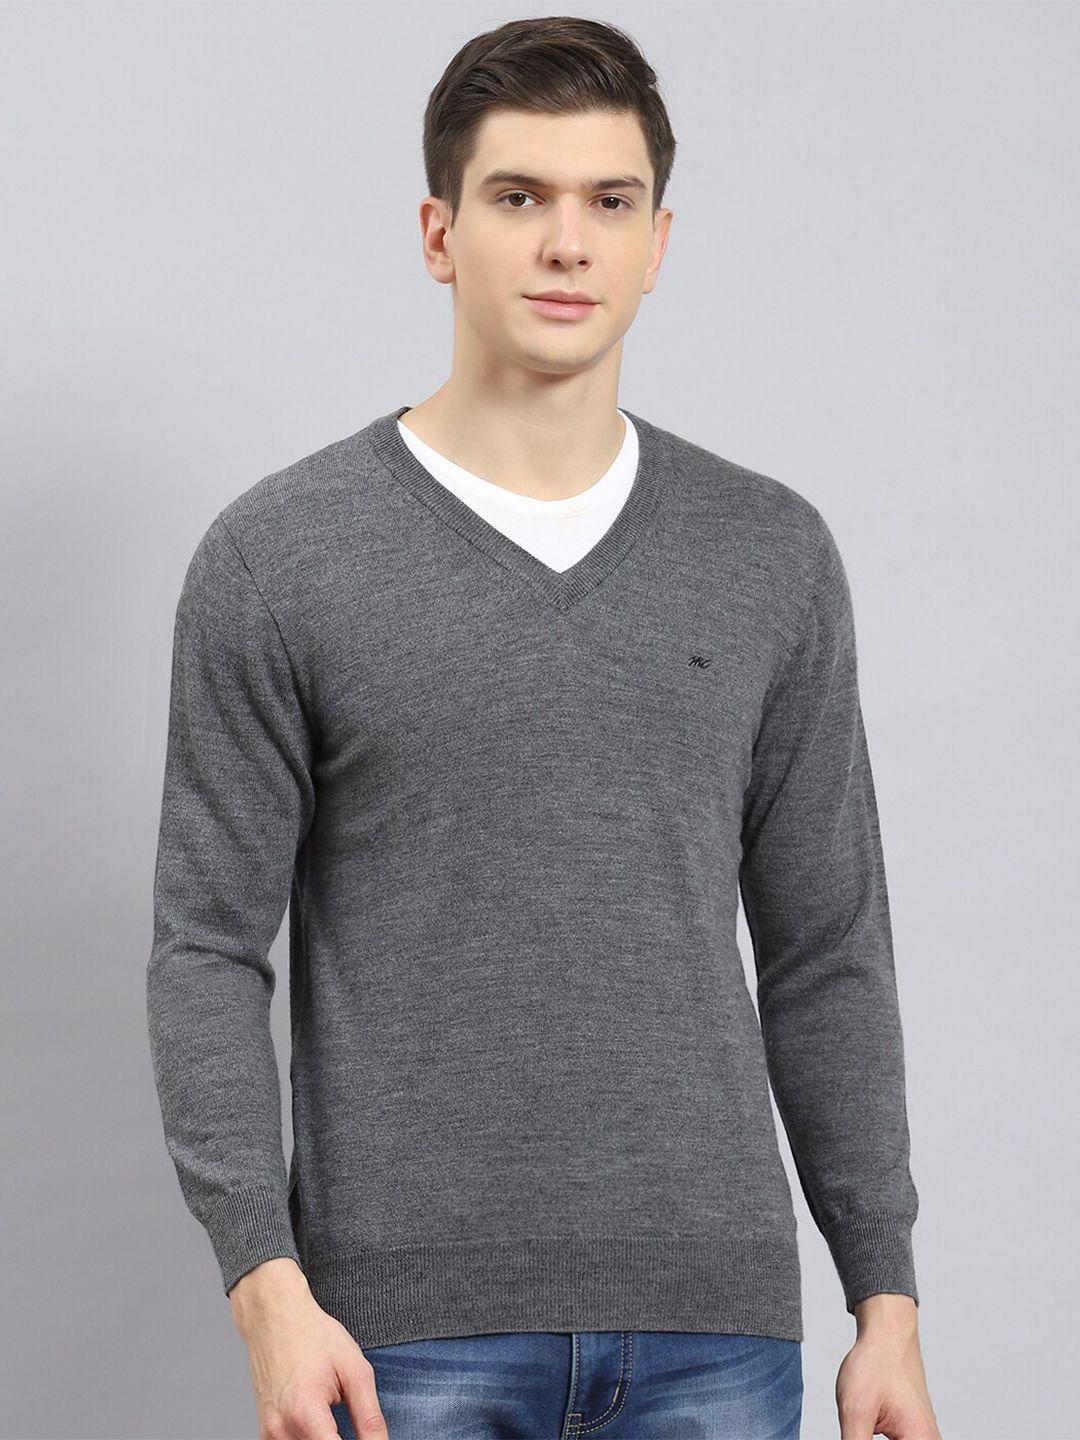 monte carlo v-neck long sleeves woolen pullover sweater